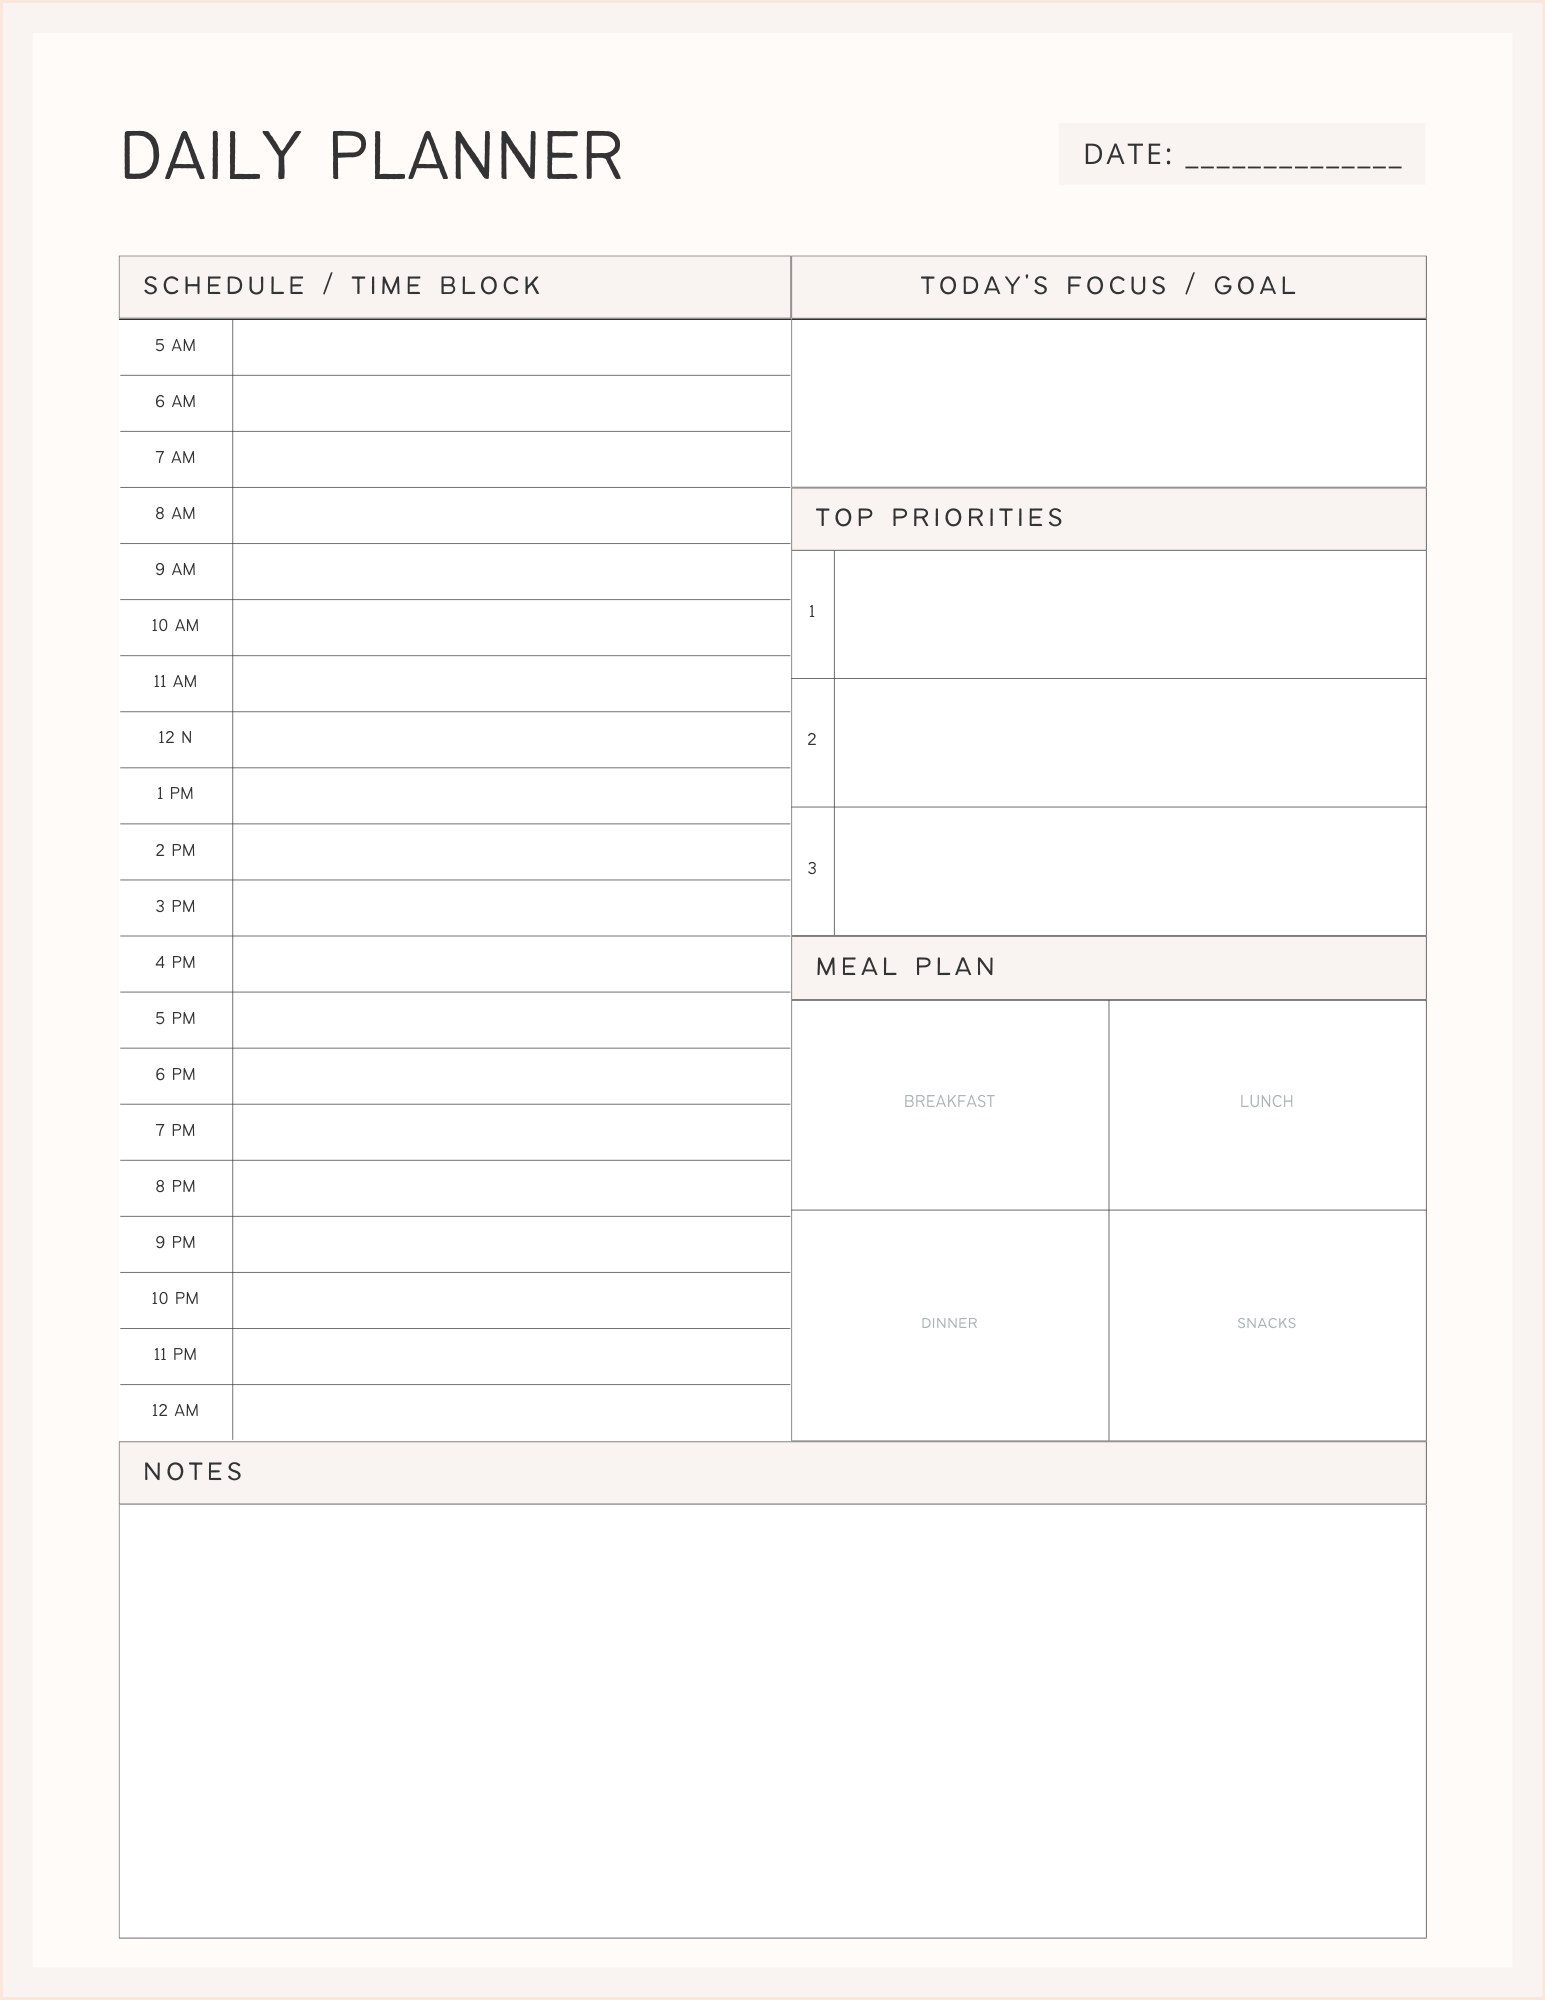 15 Free Life Planning Worksheets & Templates. - Third Bliss